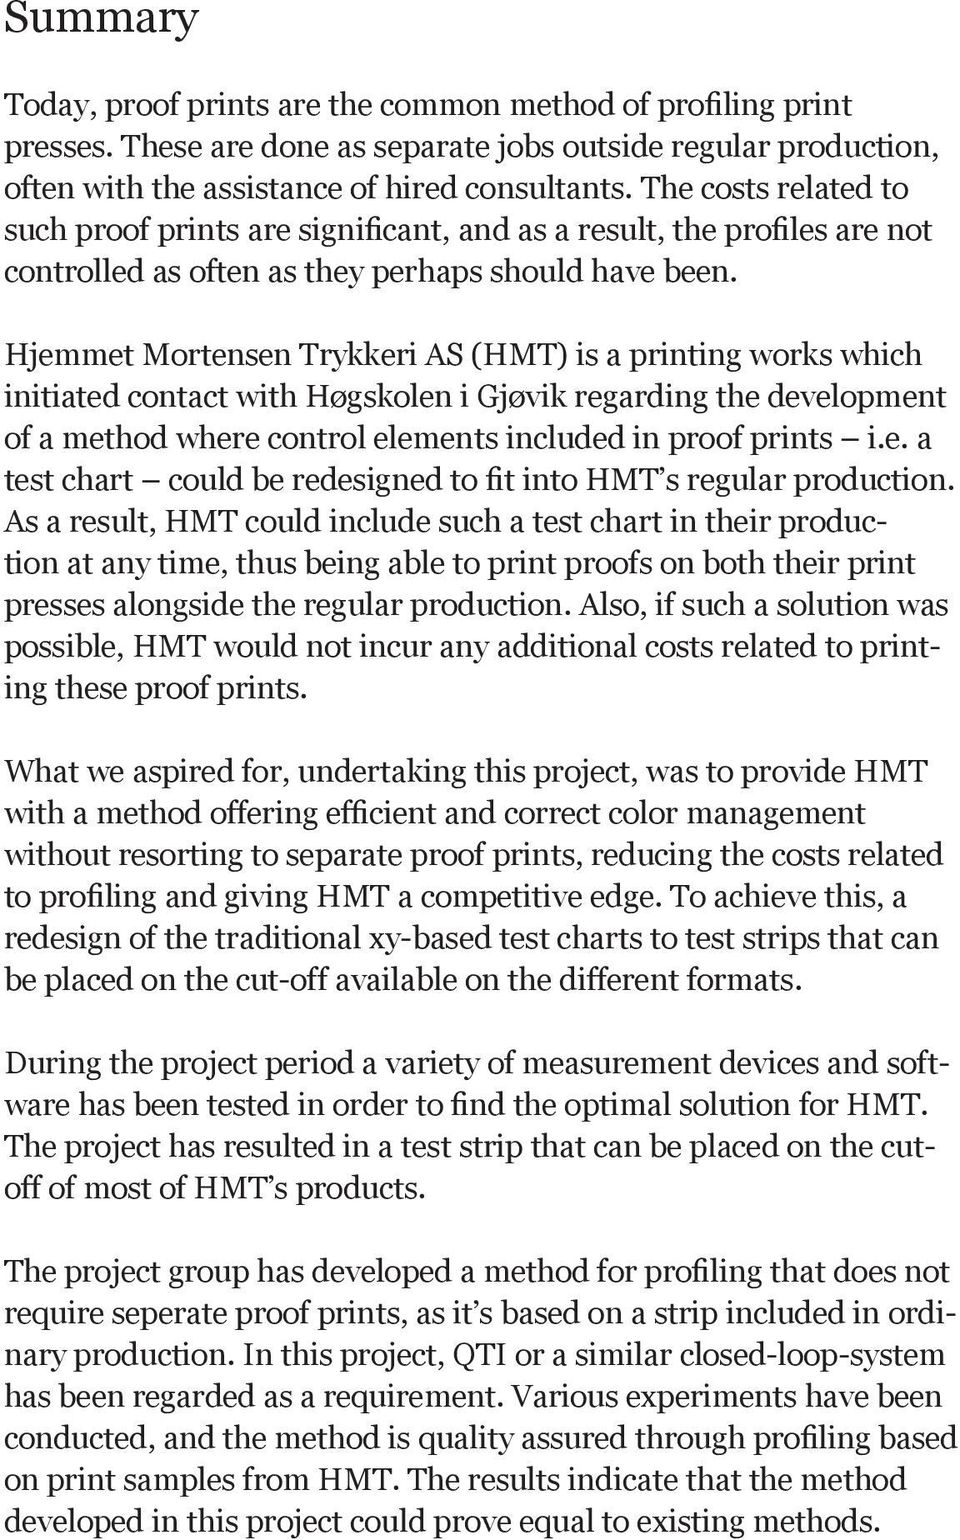 Hjemmet Mortensen Trykkeri AS (HMT) is a printing works which initiated contact with Høgskolen i Gjøvik regarding the development of a method where control elements included in proof prints i.e. a test chart could be redesigned to fit into HMT s regular production.